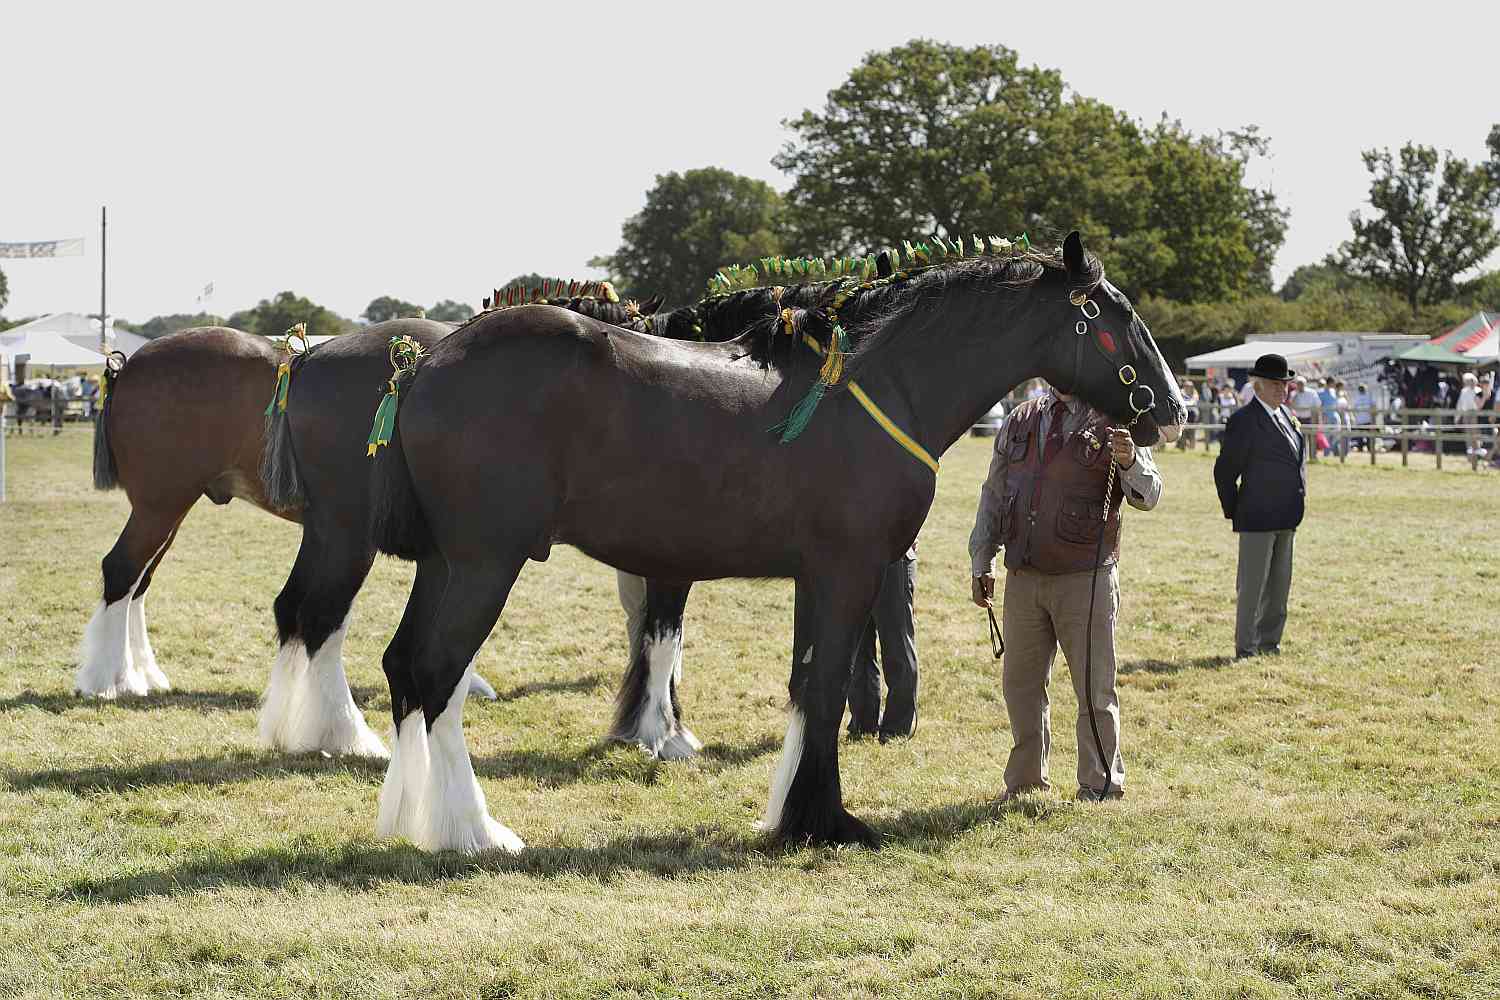 Shire horses outside with handlers